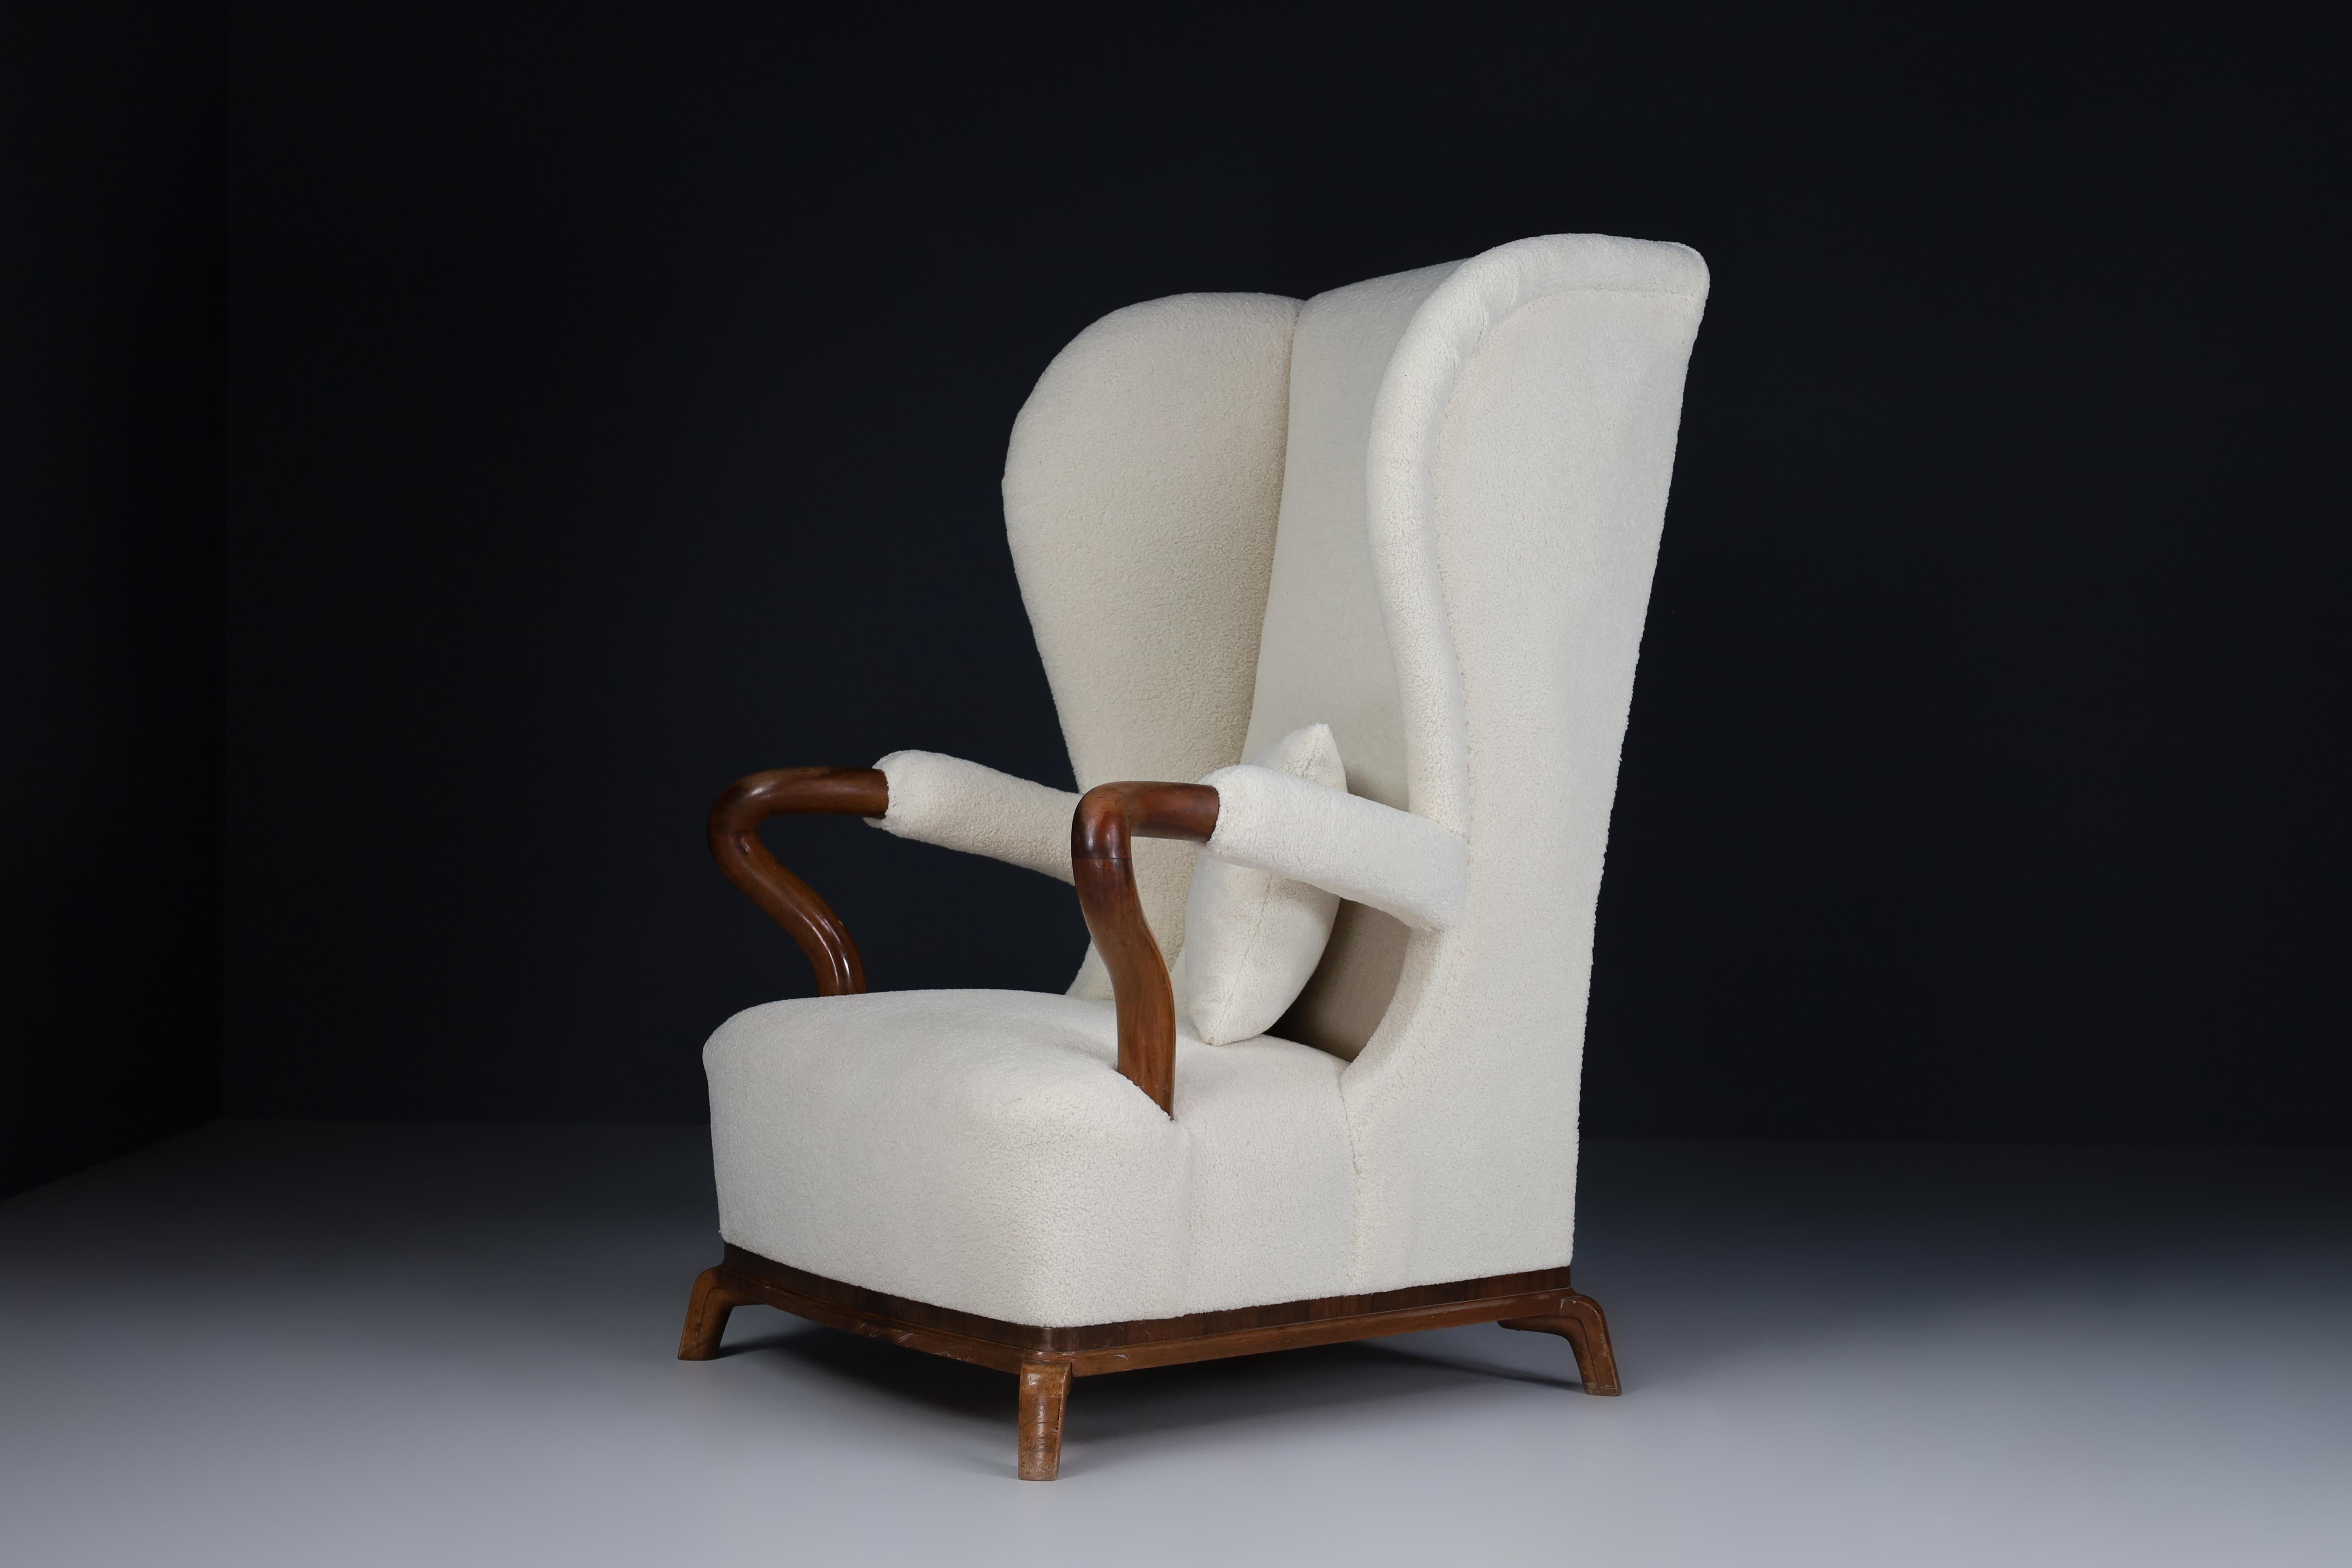 Large Monumental Wingback Armchair in Re-upholstered Teddy Fabric, France 1930s For Sale 6